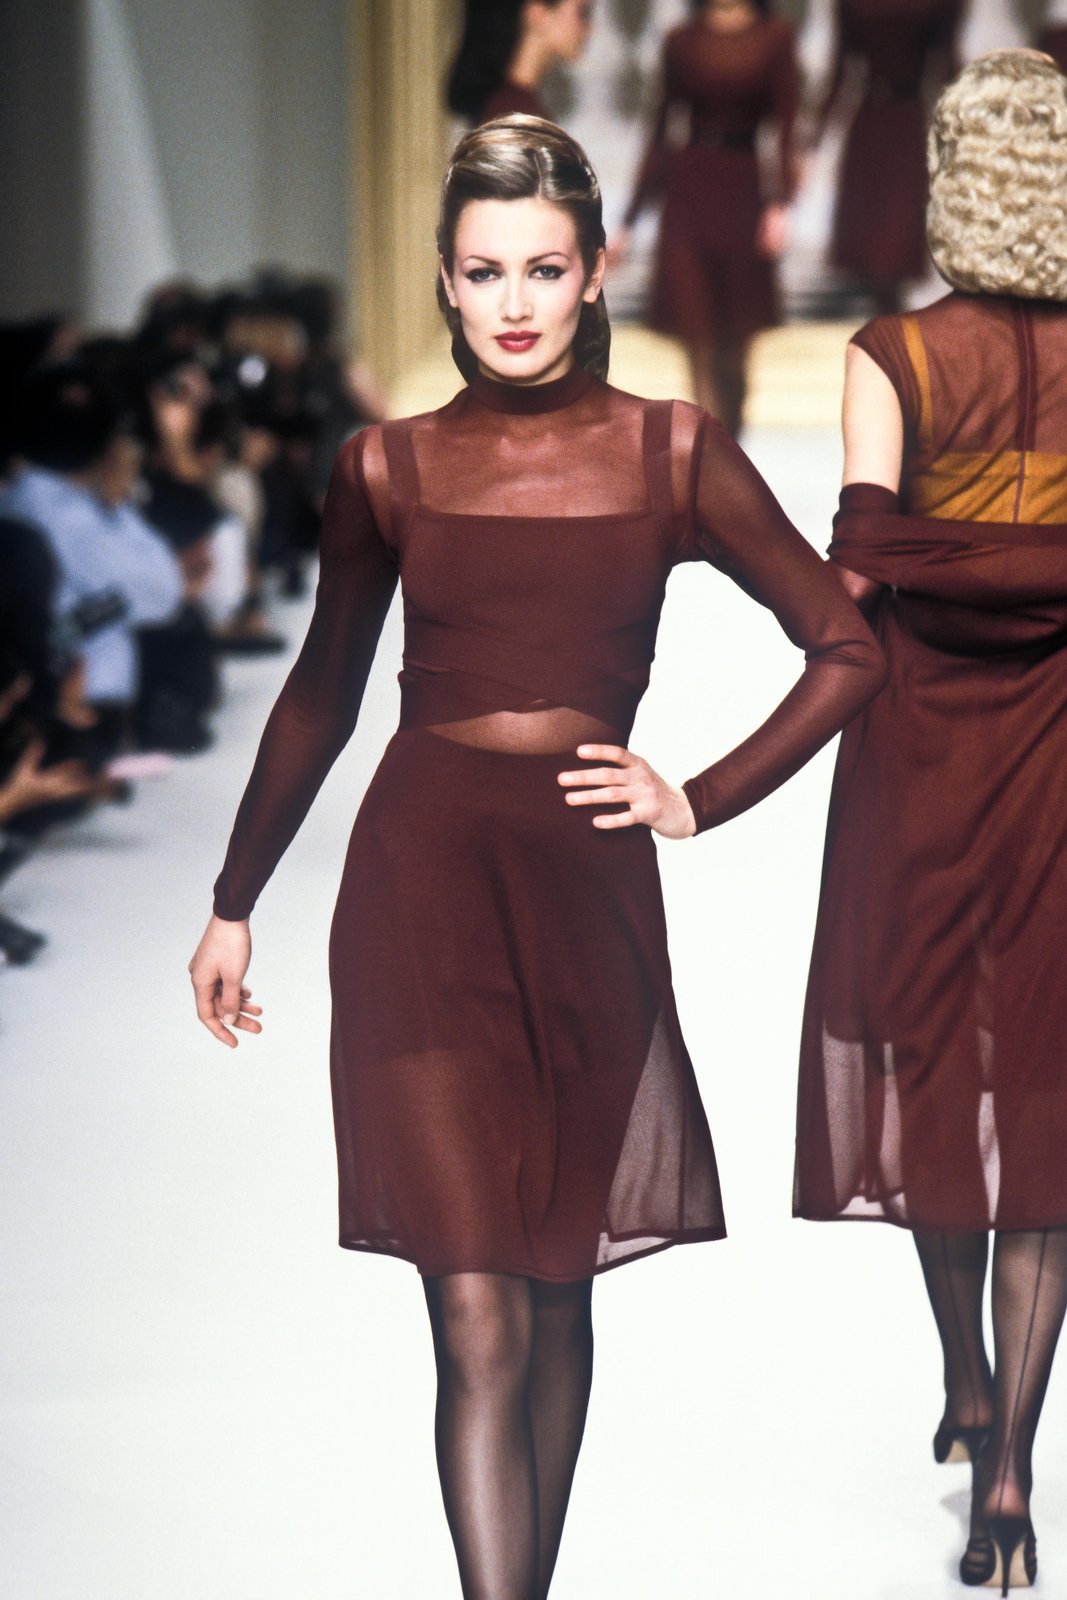 Fashion Classic: Herve LEGER Fall/Winter 1995 | Page 2 | Lipstick Alley